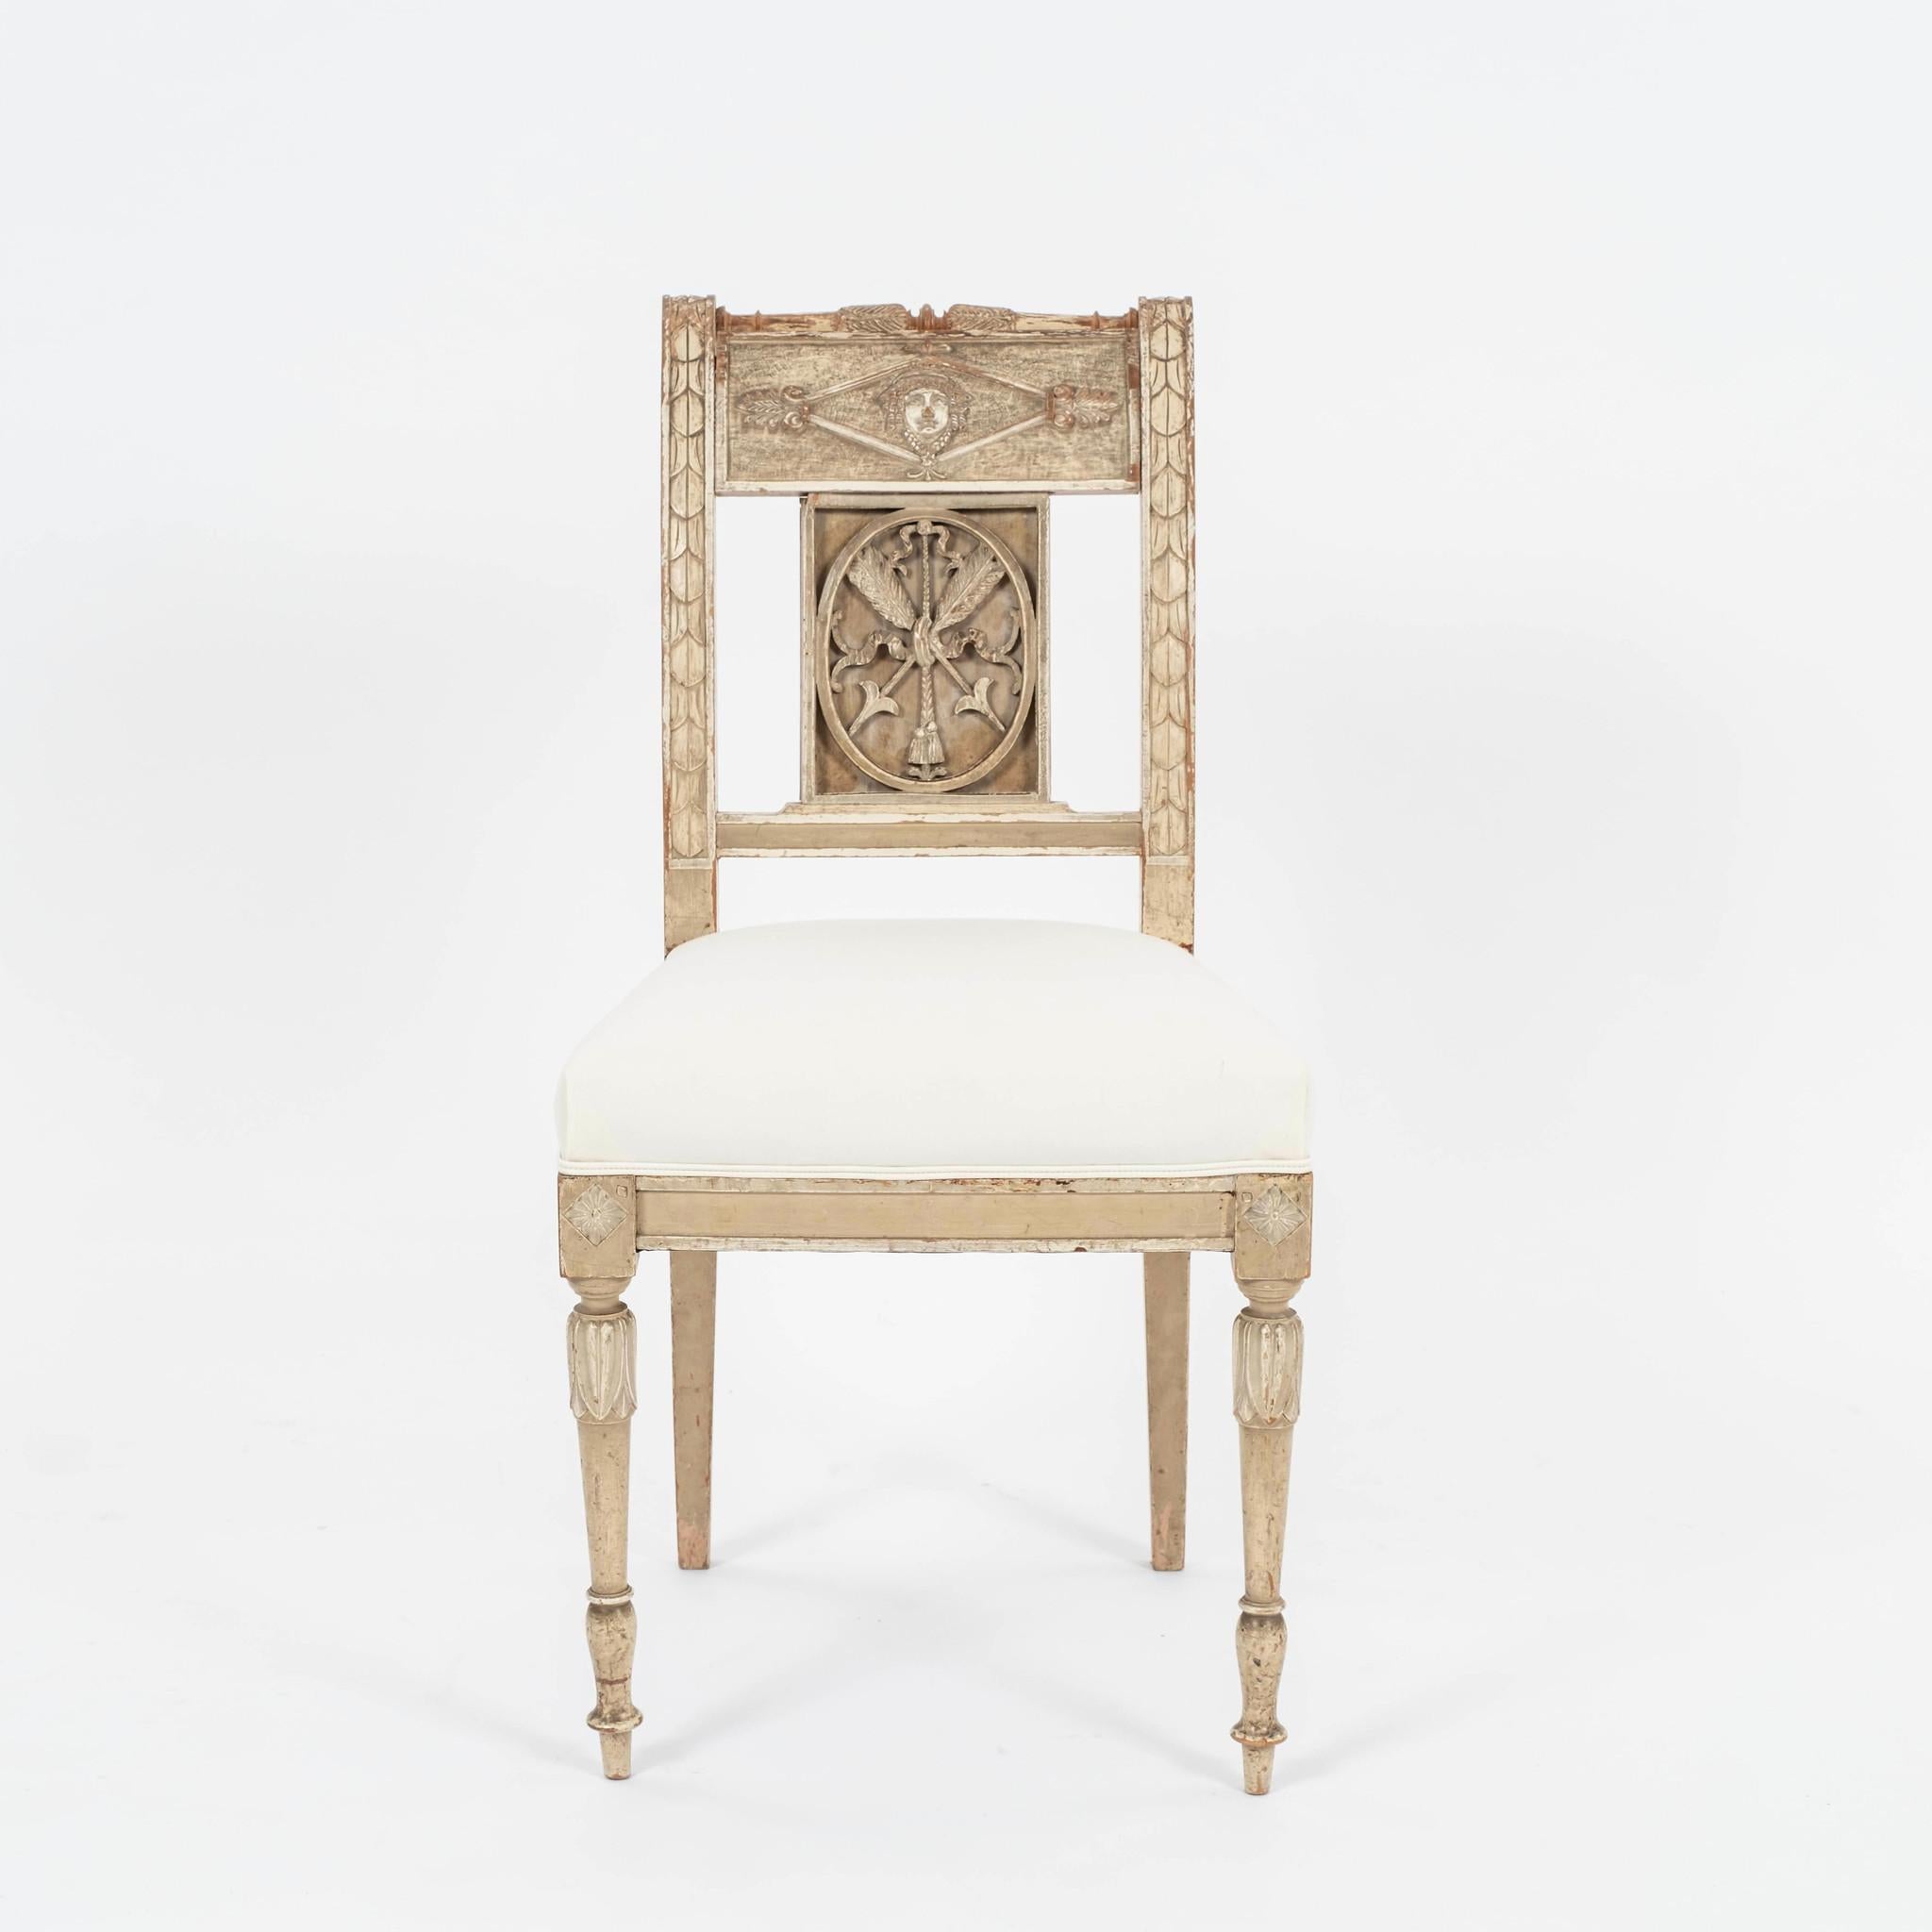 Pair 18th Century Gustavian chairs: beautifully carved, scraped painted adorned with exceptional Neoclassical motif decoration. Newly upholstered in ticking.
Four available and sold by the pair in this listing.